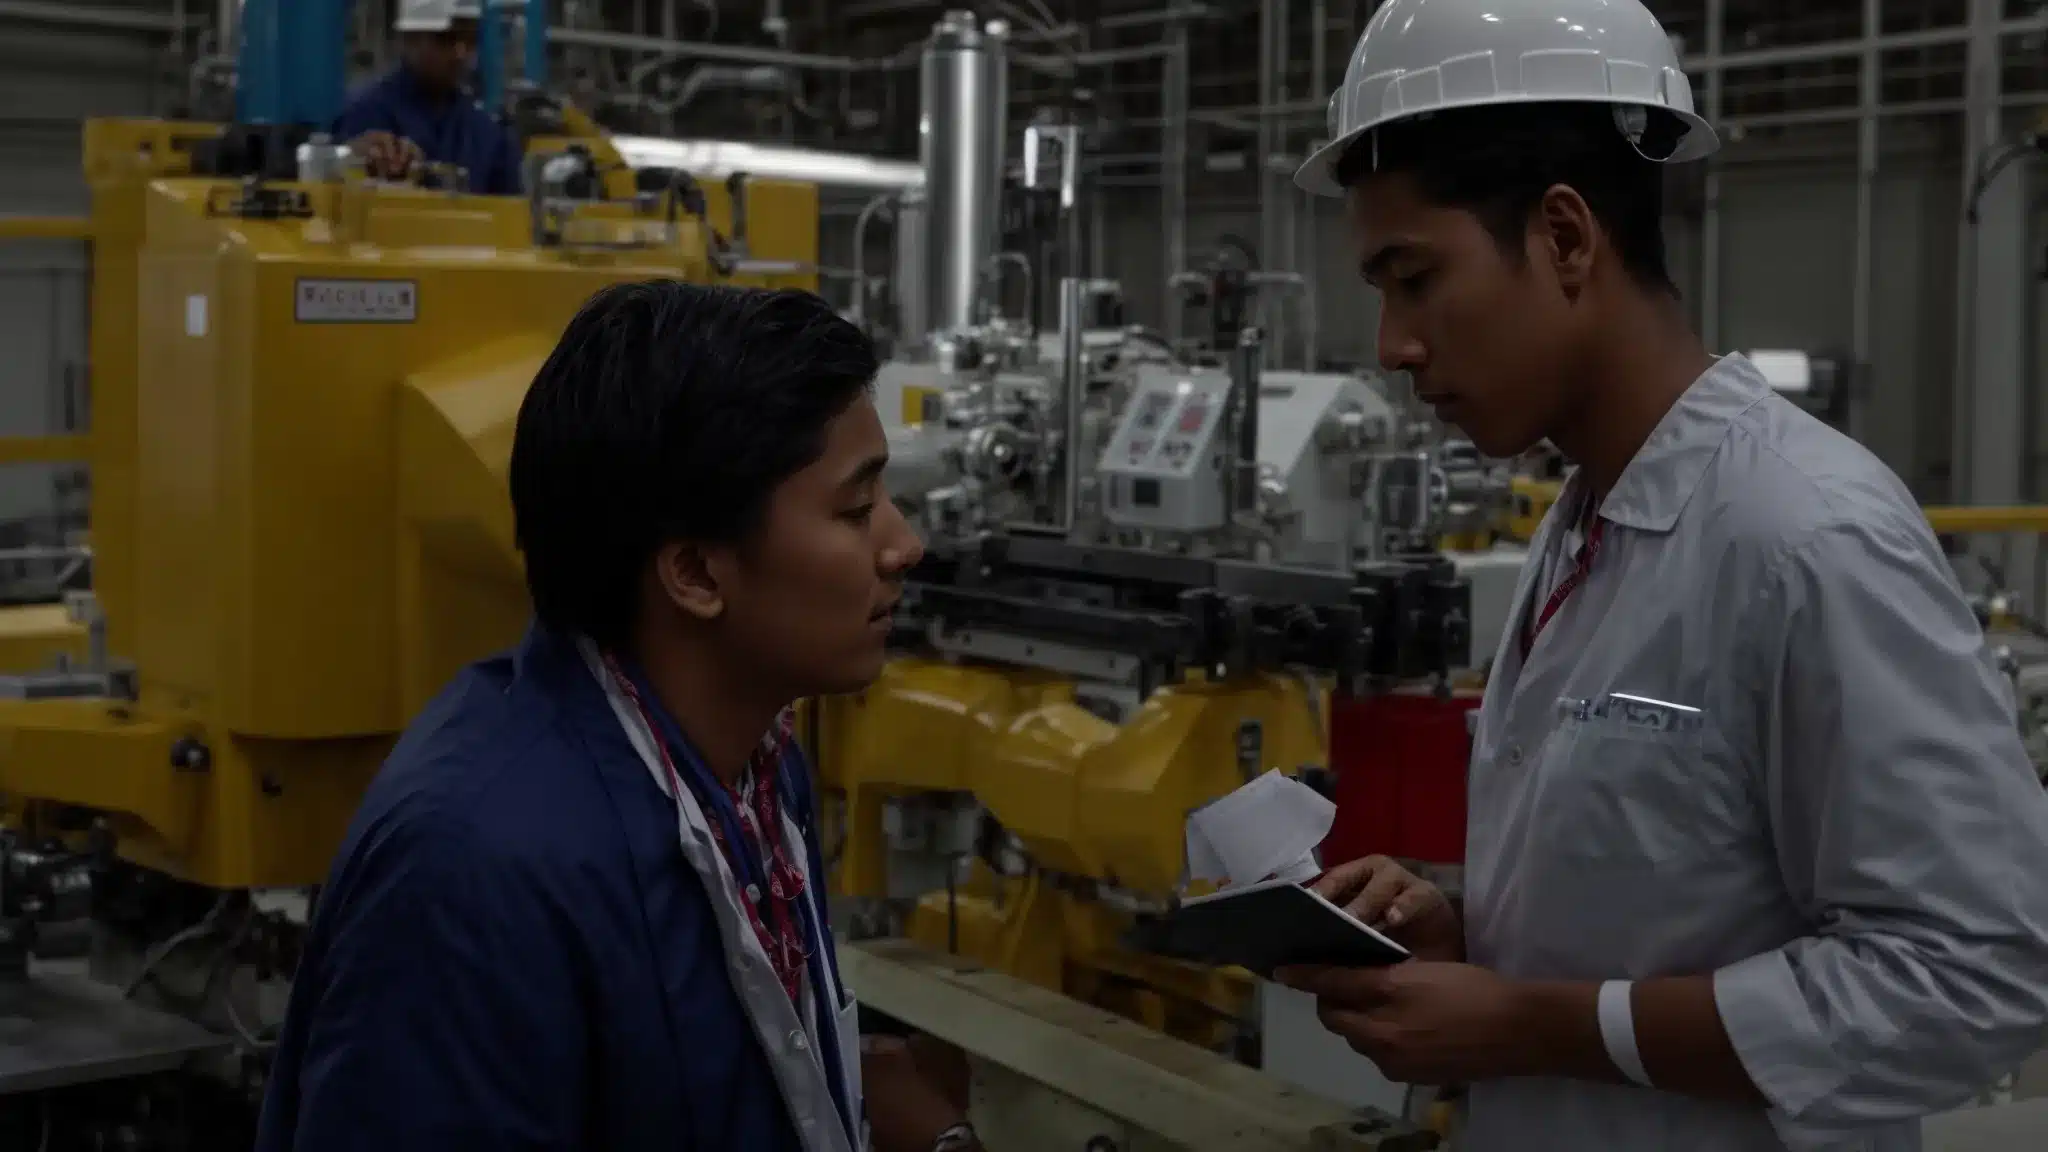 A Healthcare Professional Consults With A Factory Worker Next To Industrial Machinery.